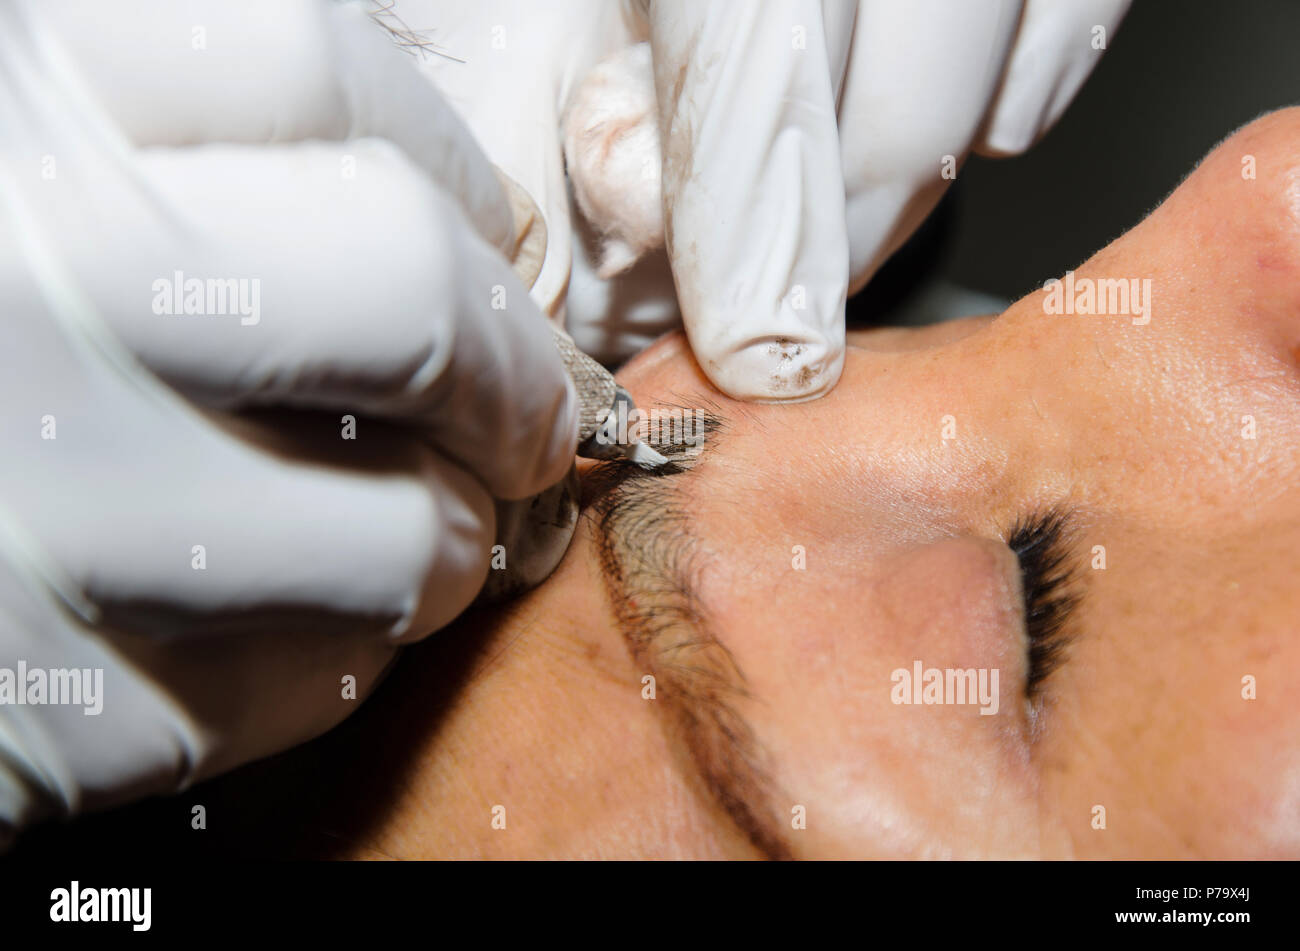 Permanent makeup tattooing of eyebrows. Cosmetologist applying permanent make up on eyebrows - eyebrow tattoo Stock Photo